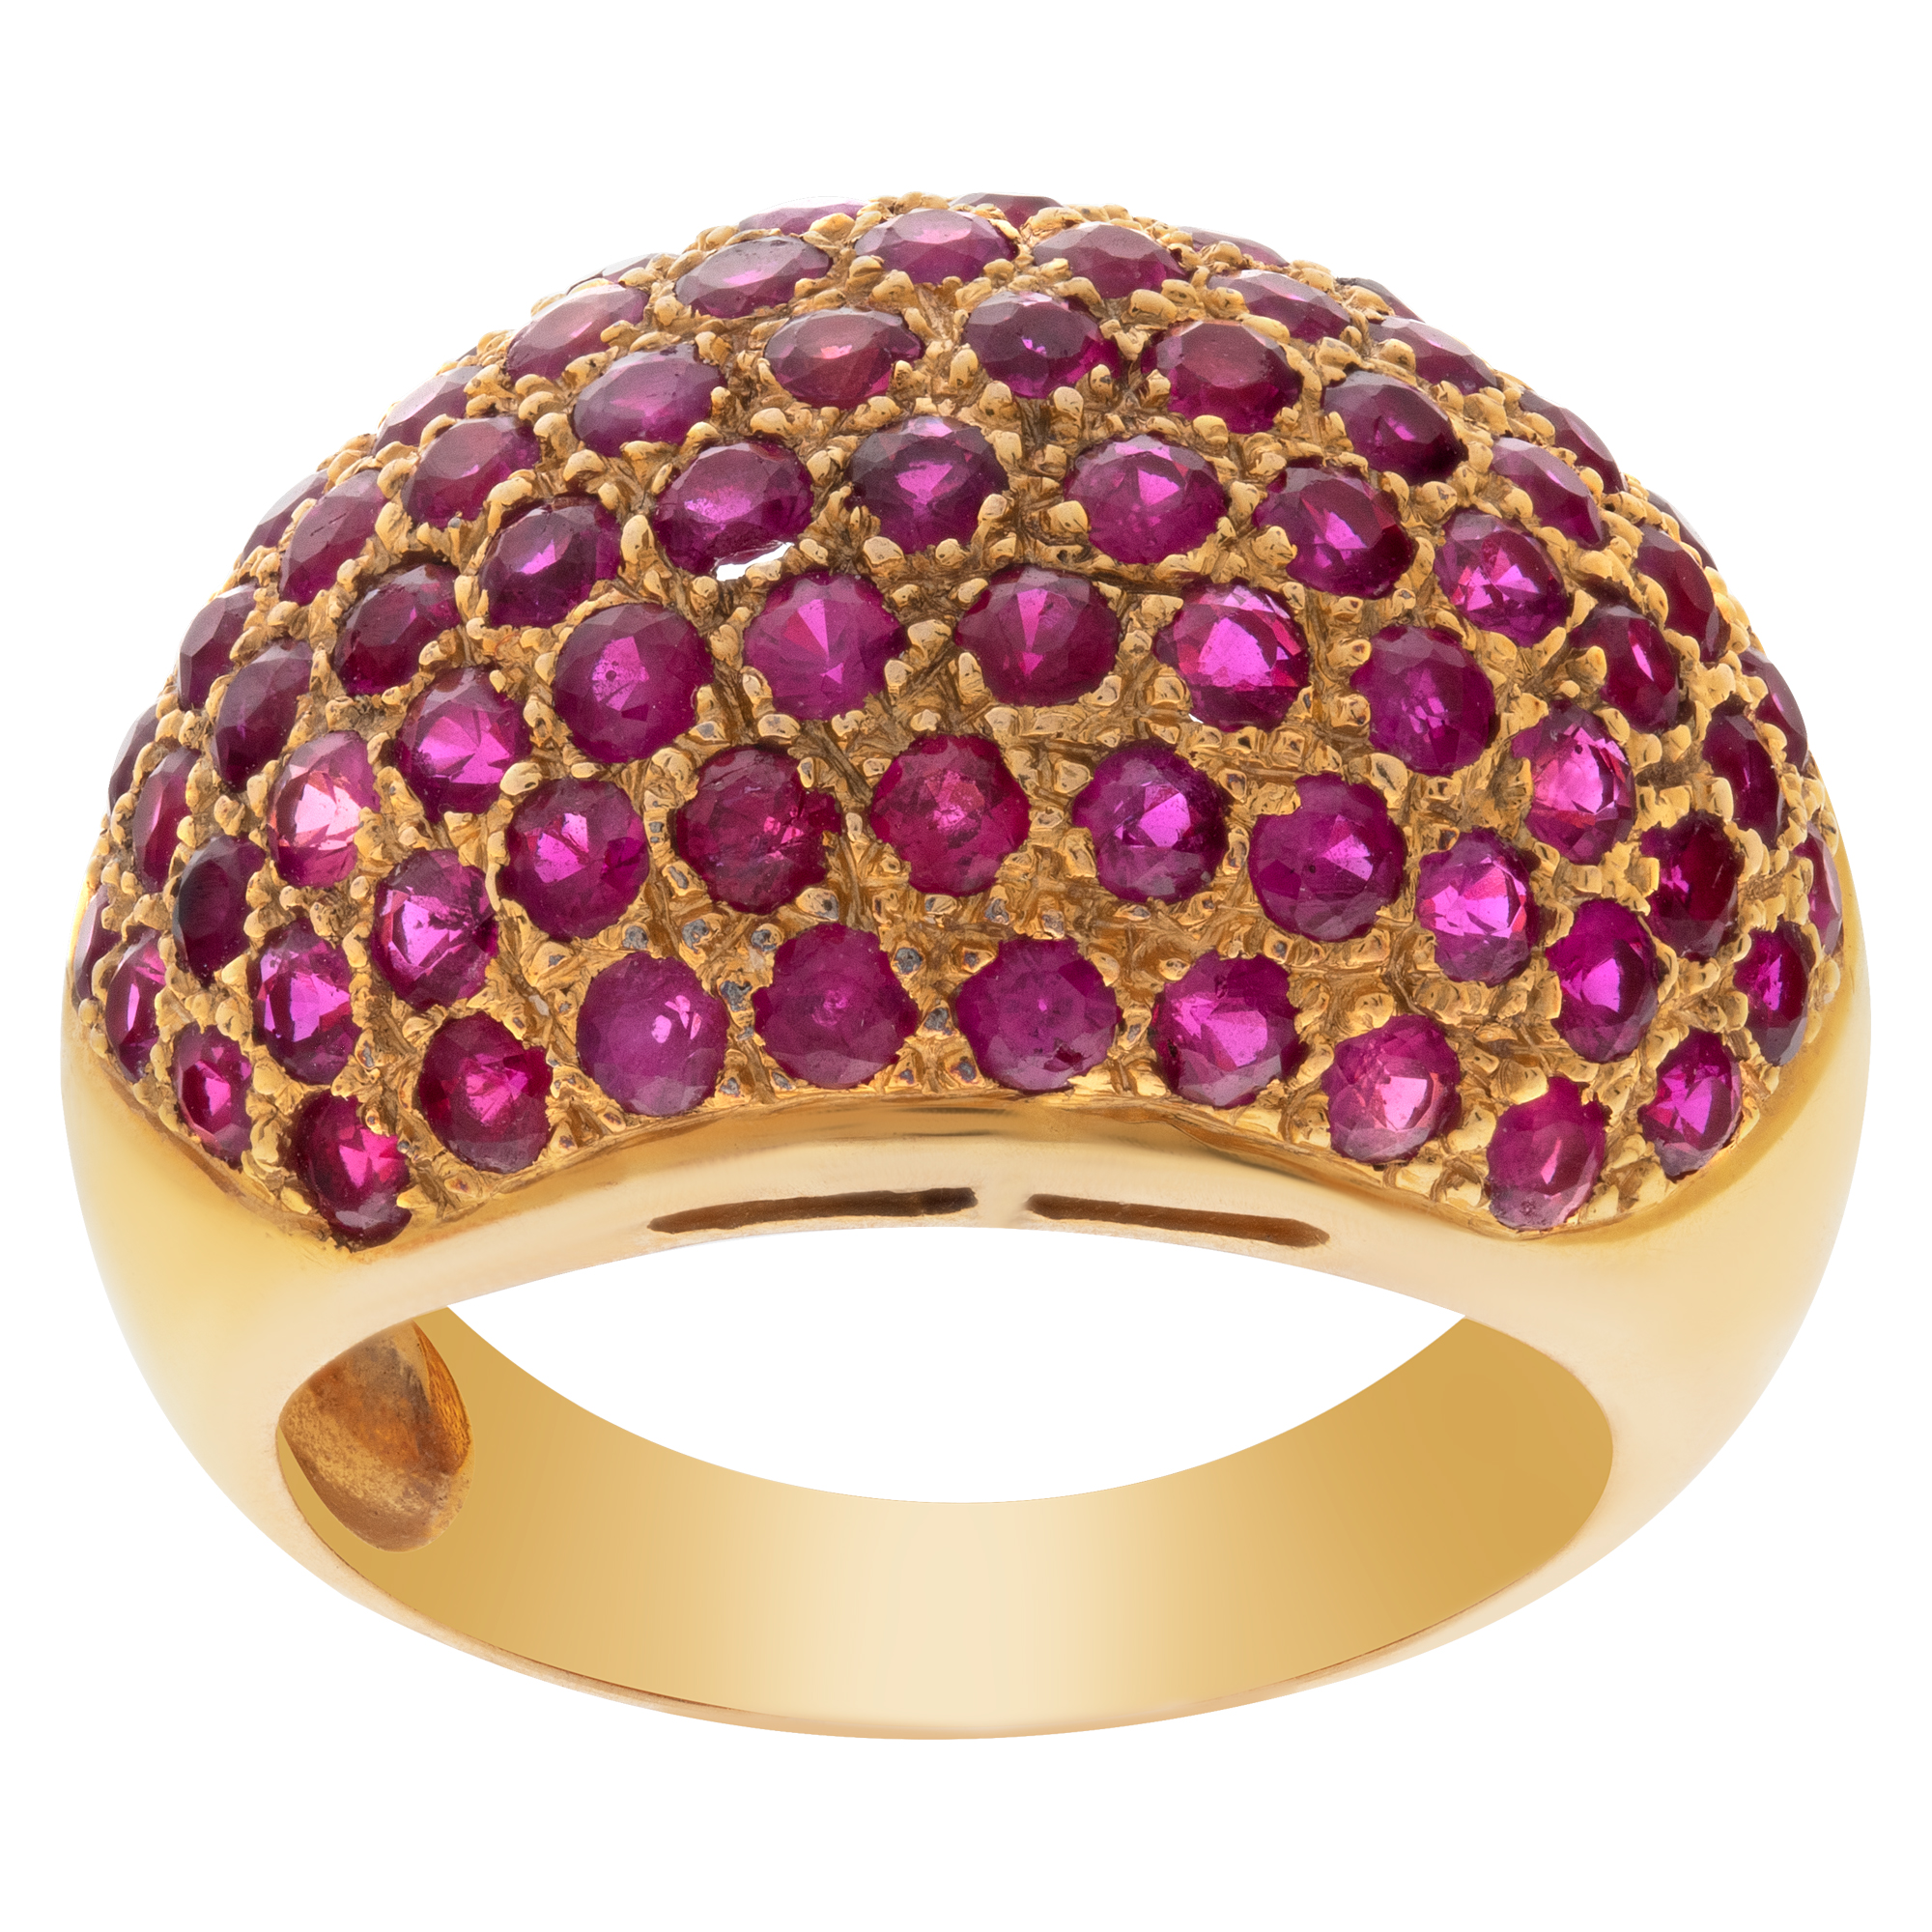 Round brilliant cut rubies set in 18K rose gold ring. Total rubies approximate weight: 3.0 carats. (Stones)